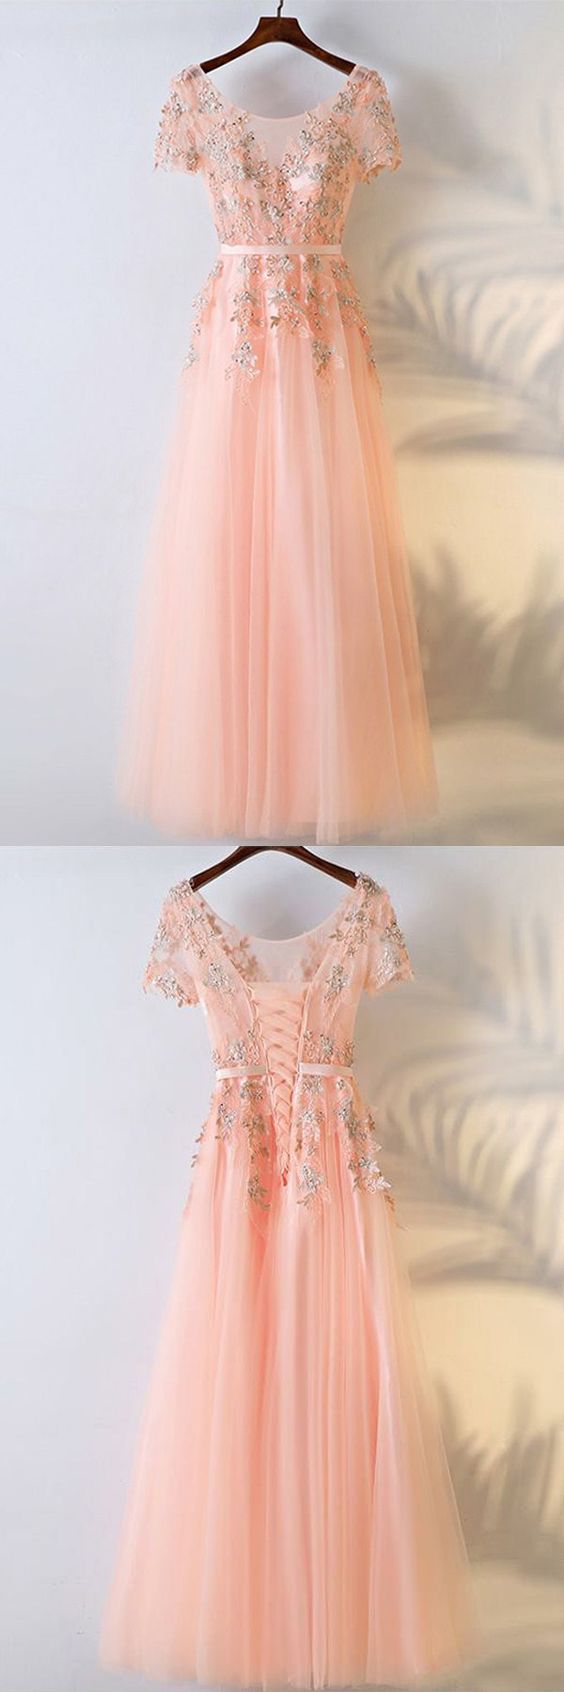 A-line Crew Short Sleeves Floor-length Coral Tulle Prom Dress With Appliques M6388